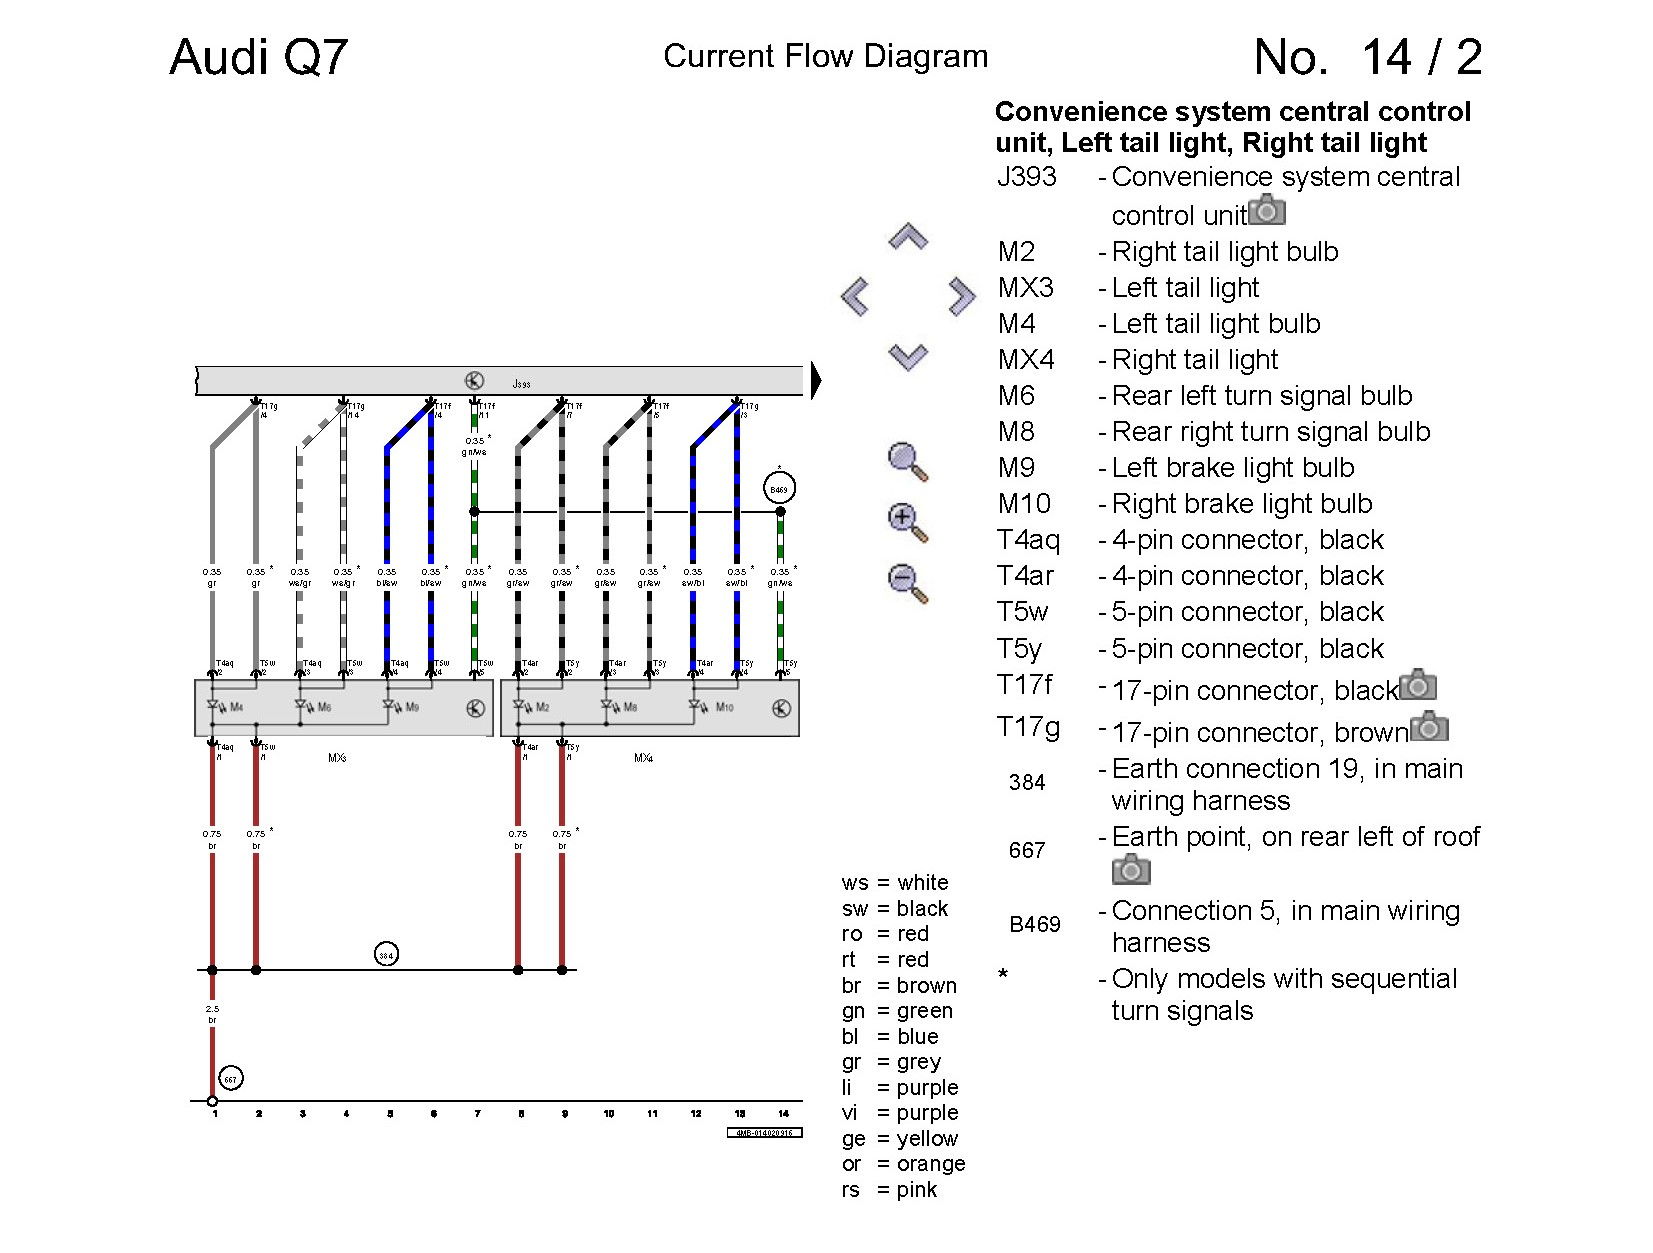 Blackline Taillight in US - AudiWorld Forums 1997 jeep wrangler taillight wiring diagram 